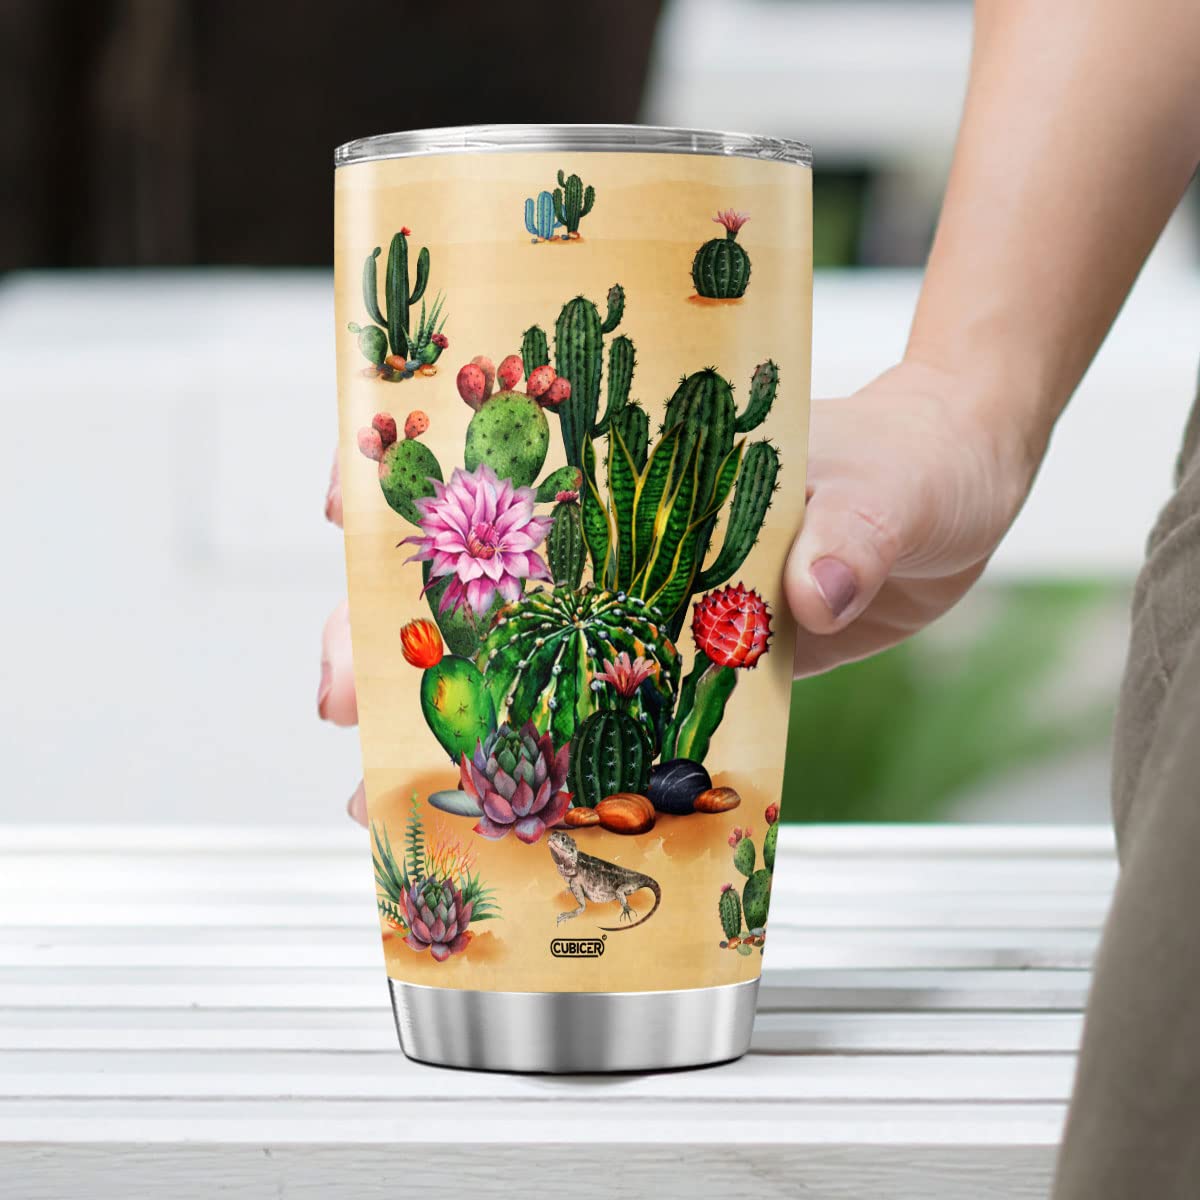 CUBICER 20 Oz Cactus Tumbler With Lid For Plant Lovers Women Girls Teens Kids Funny Sayings Stainless Steel Cups Inspirational Quotes Insulated Coffee Mugs Travel Drinking Glass